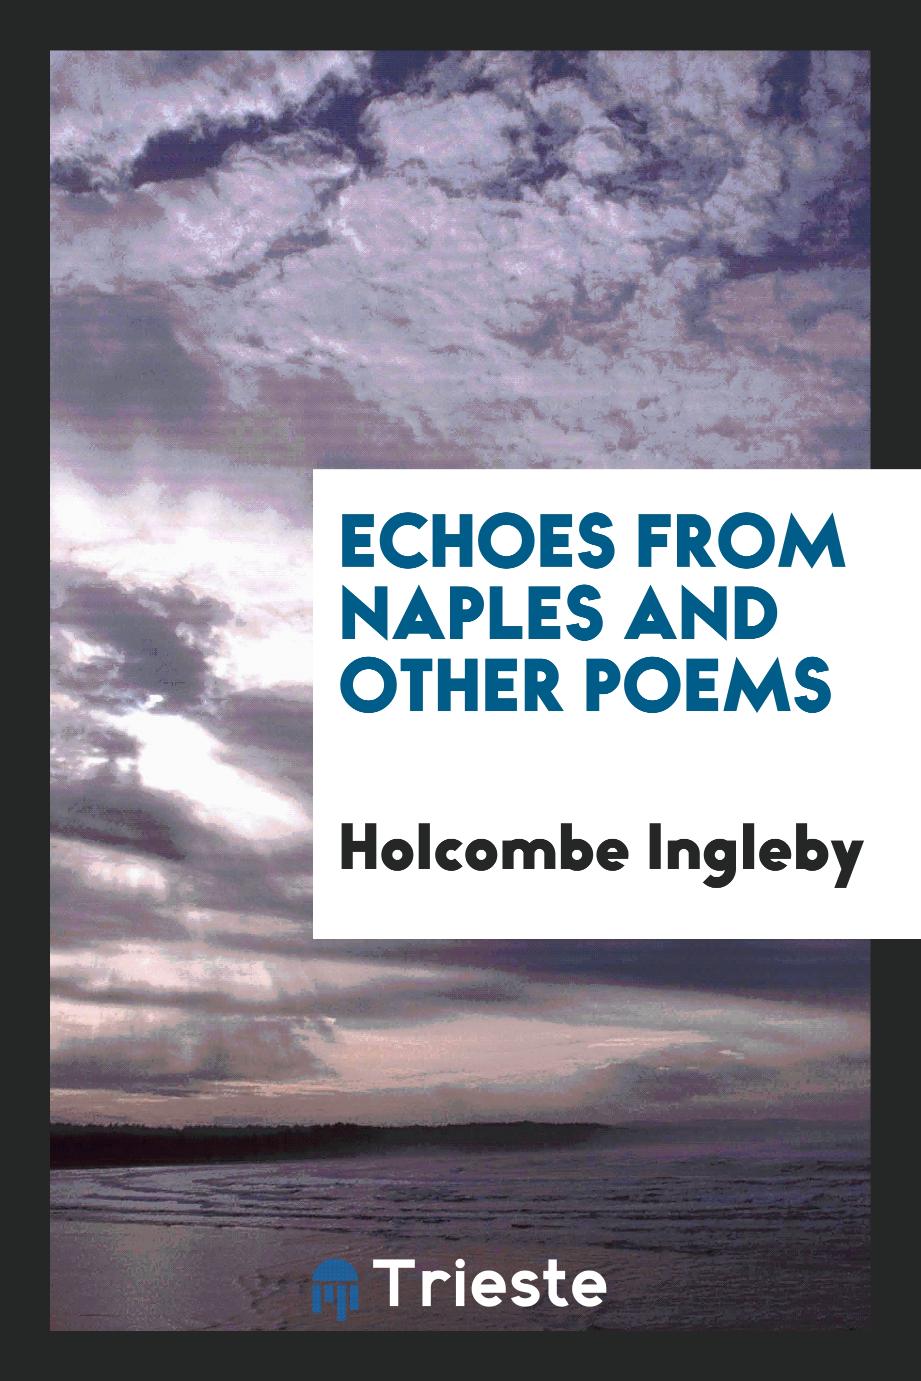 Echoes from Naples and Other Poems